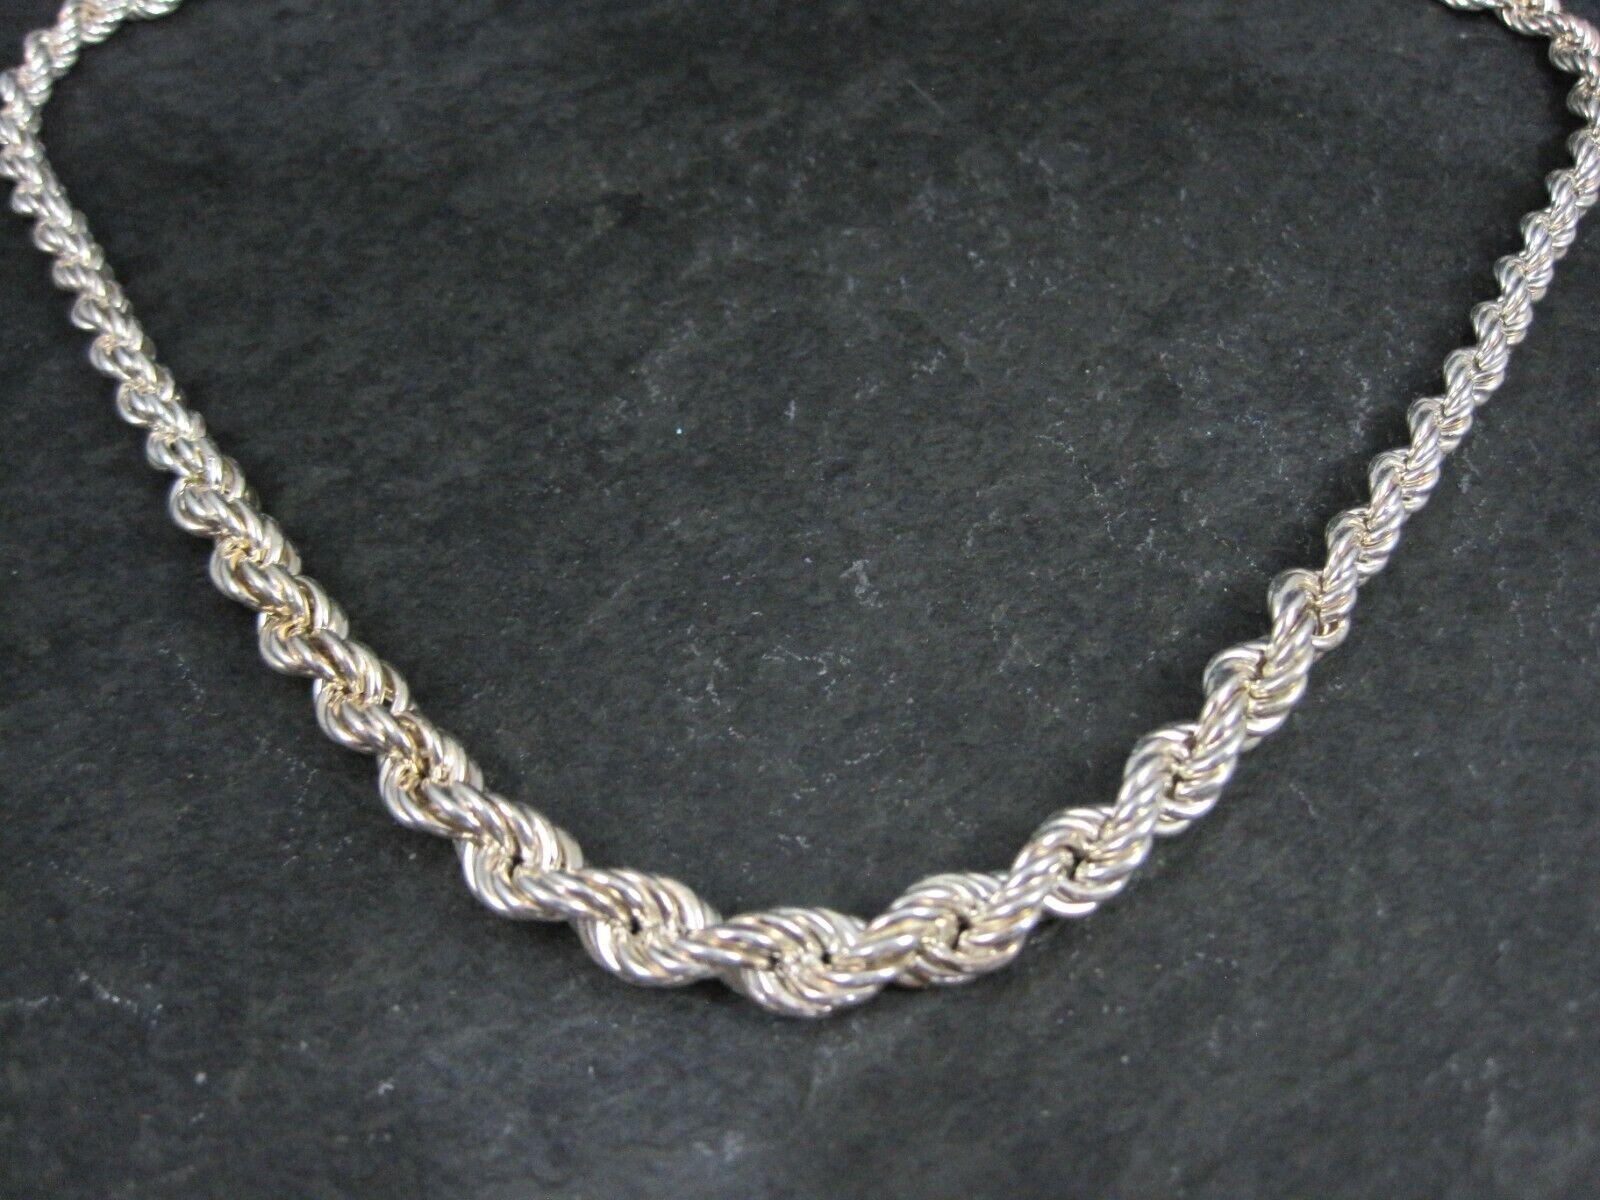 New with tags
Designer Giani Bernini
Italian sterling silver graduated twisted rope chain
18 inches from end to end
Graduates from 4 to 6mm wide
New with tags
Retail: $300